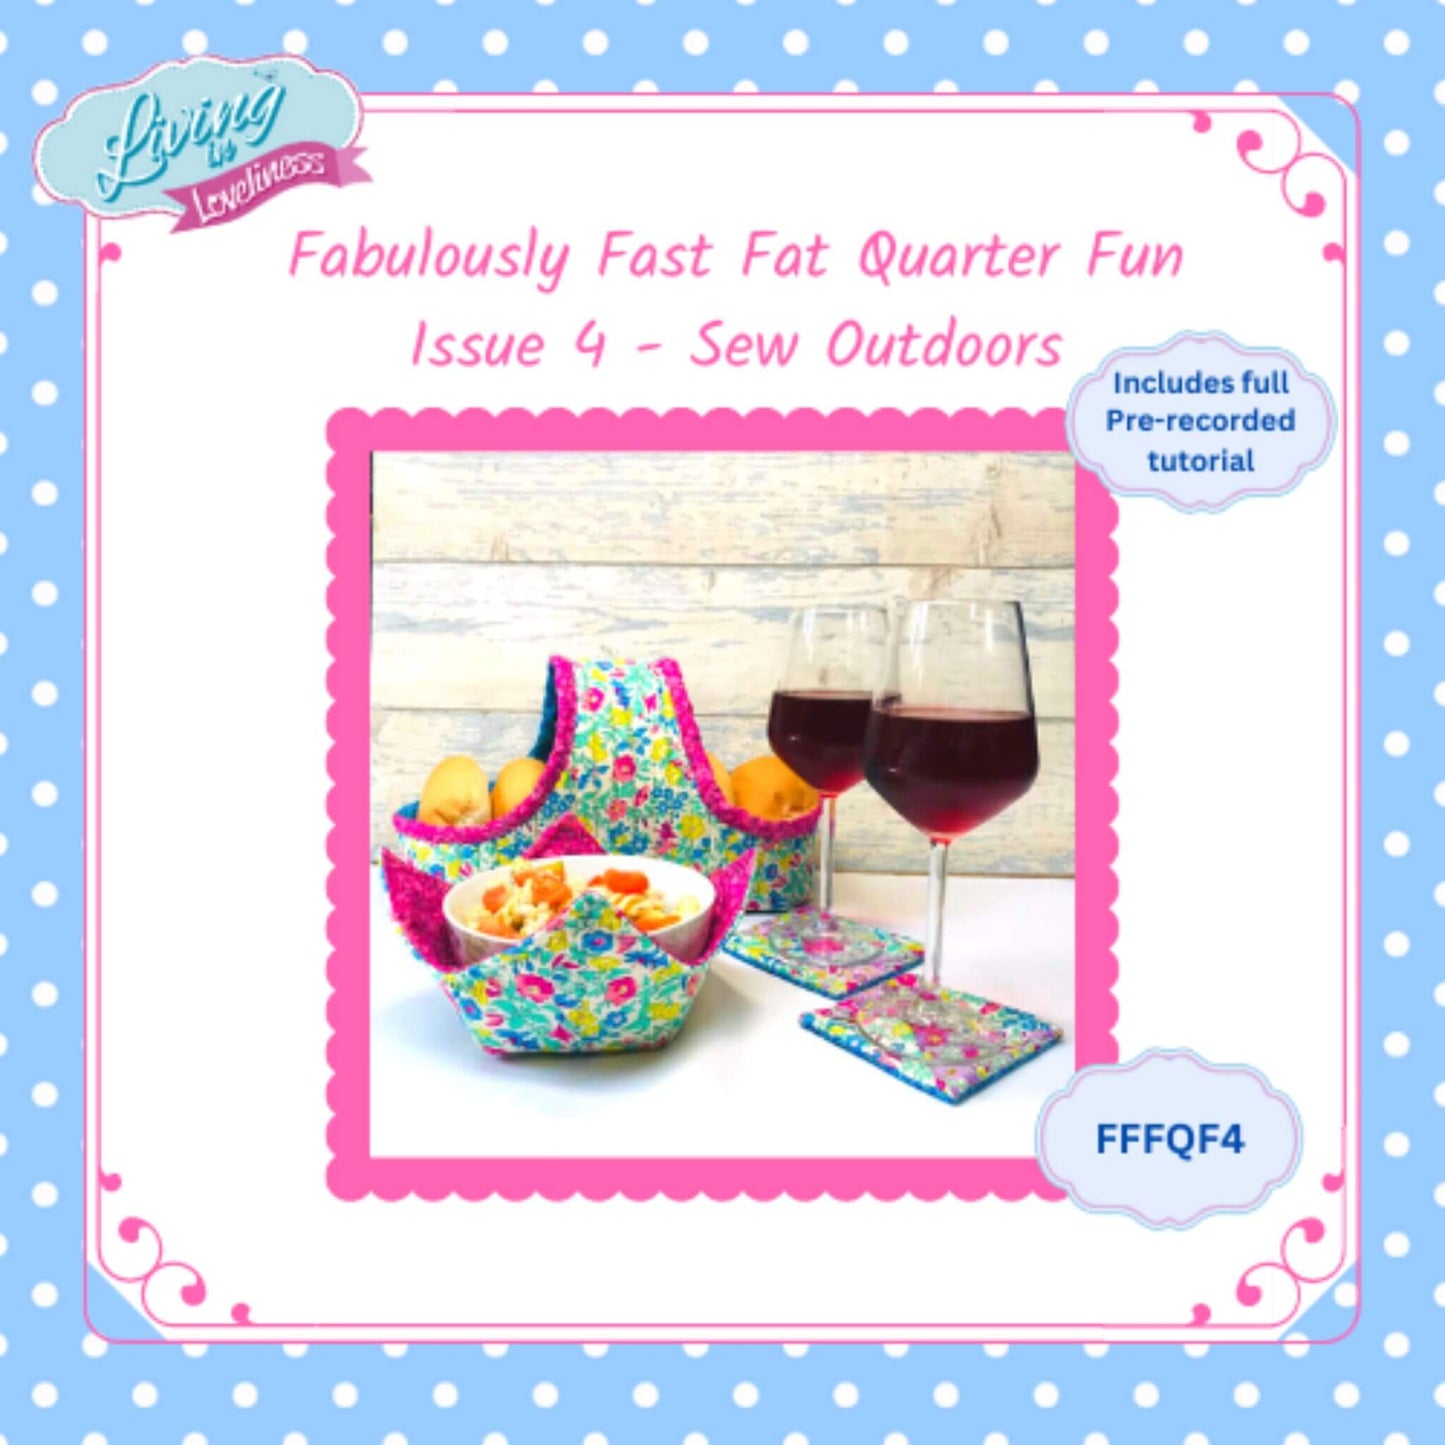 Issue 4 - Sew Outdoors - The Fabulously Fast Fat Quarter Fun Series by Living in Loveliness